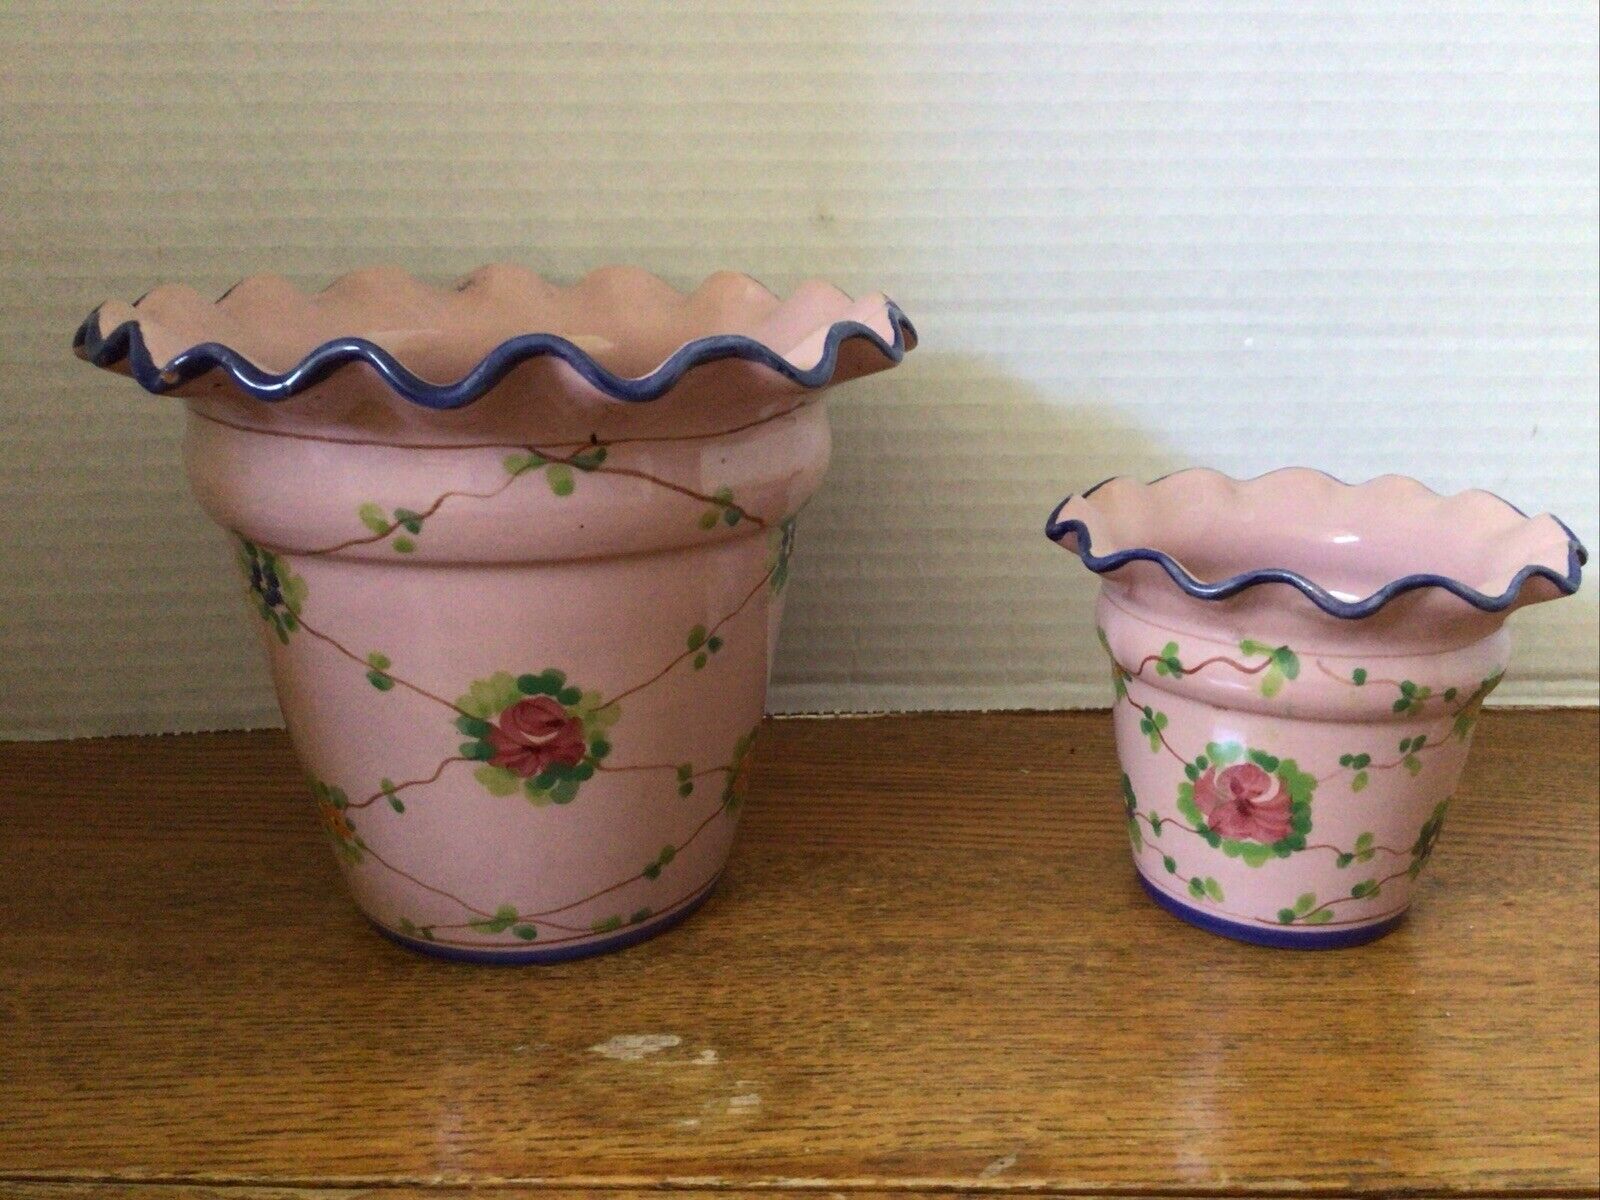 Italian, Pink, Roses, Blue Ruffled, Hand Painted Flower Pots